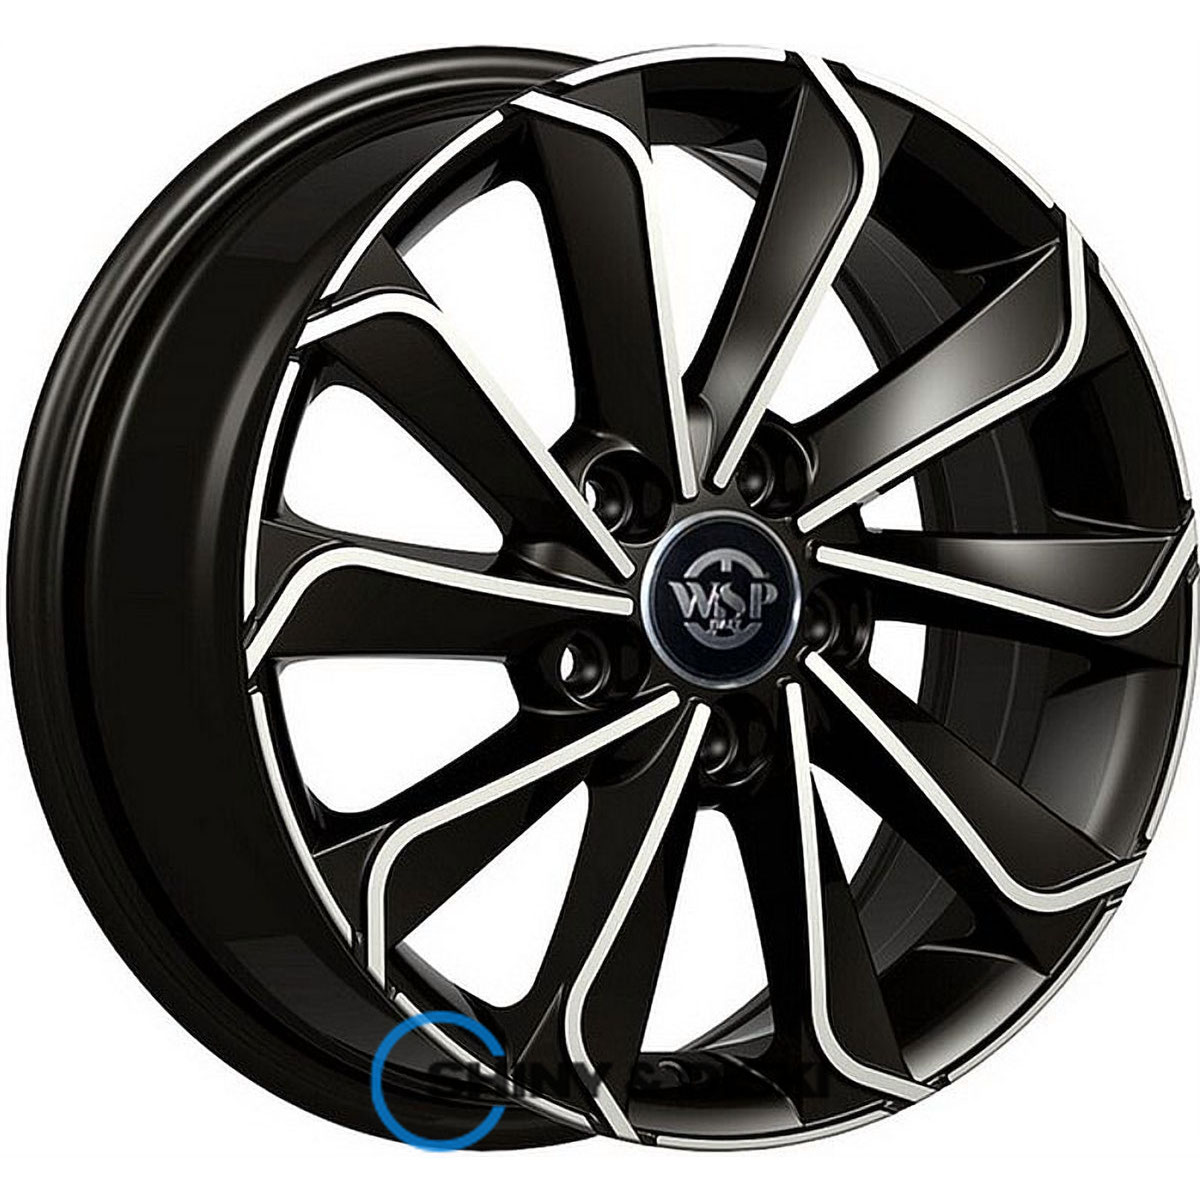 wsp italy ford wd003 corinto glossy black polished r16 w6.5 pcd5x108 et47 dia63.4